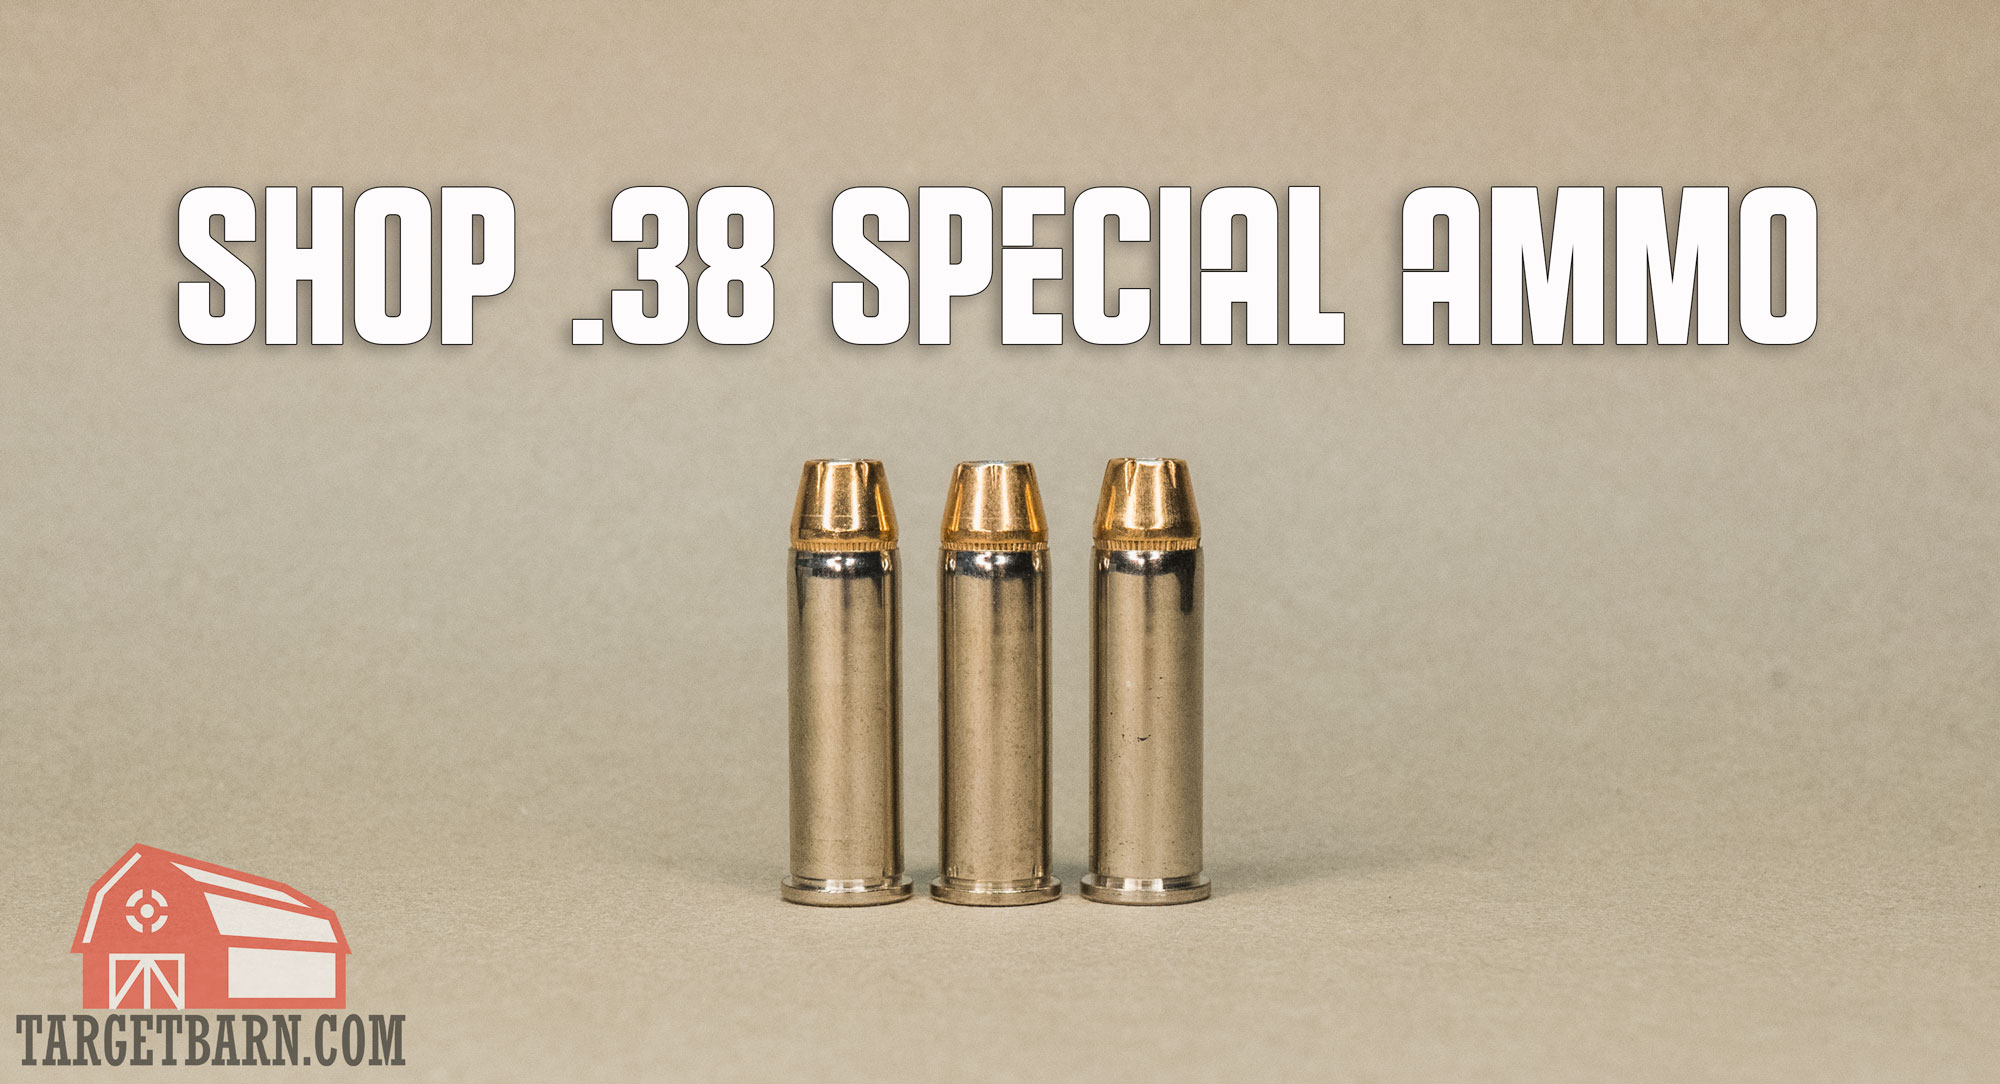 three rounds of 38 special with the text "shop .38 special ammo"